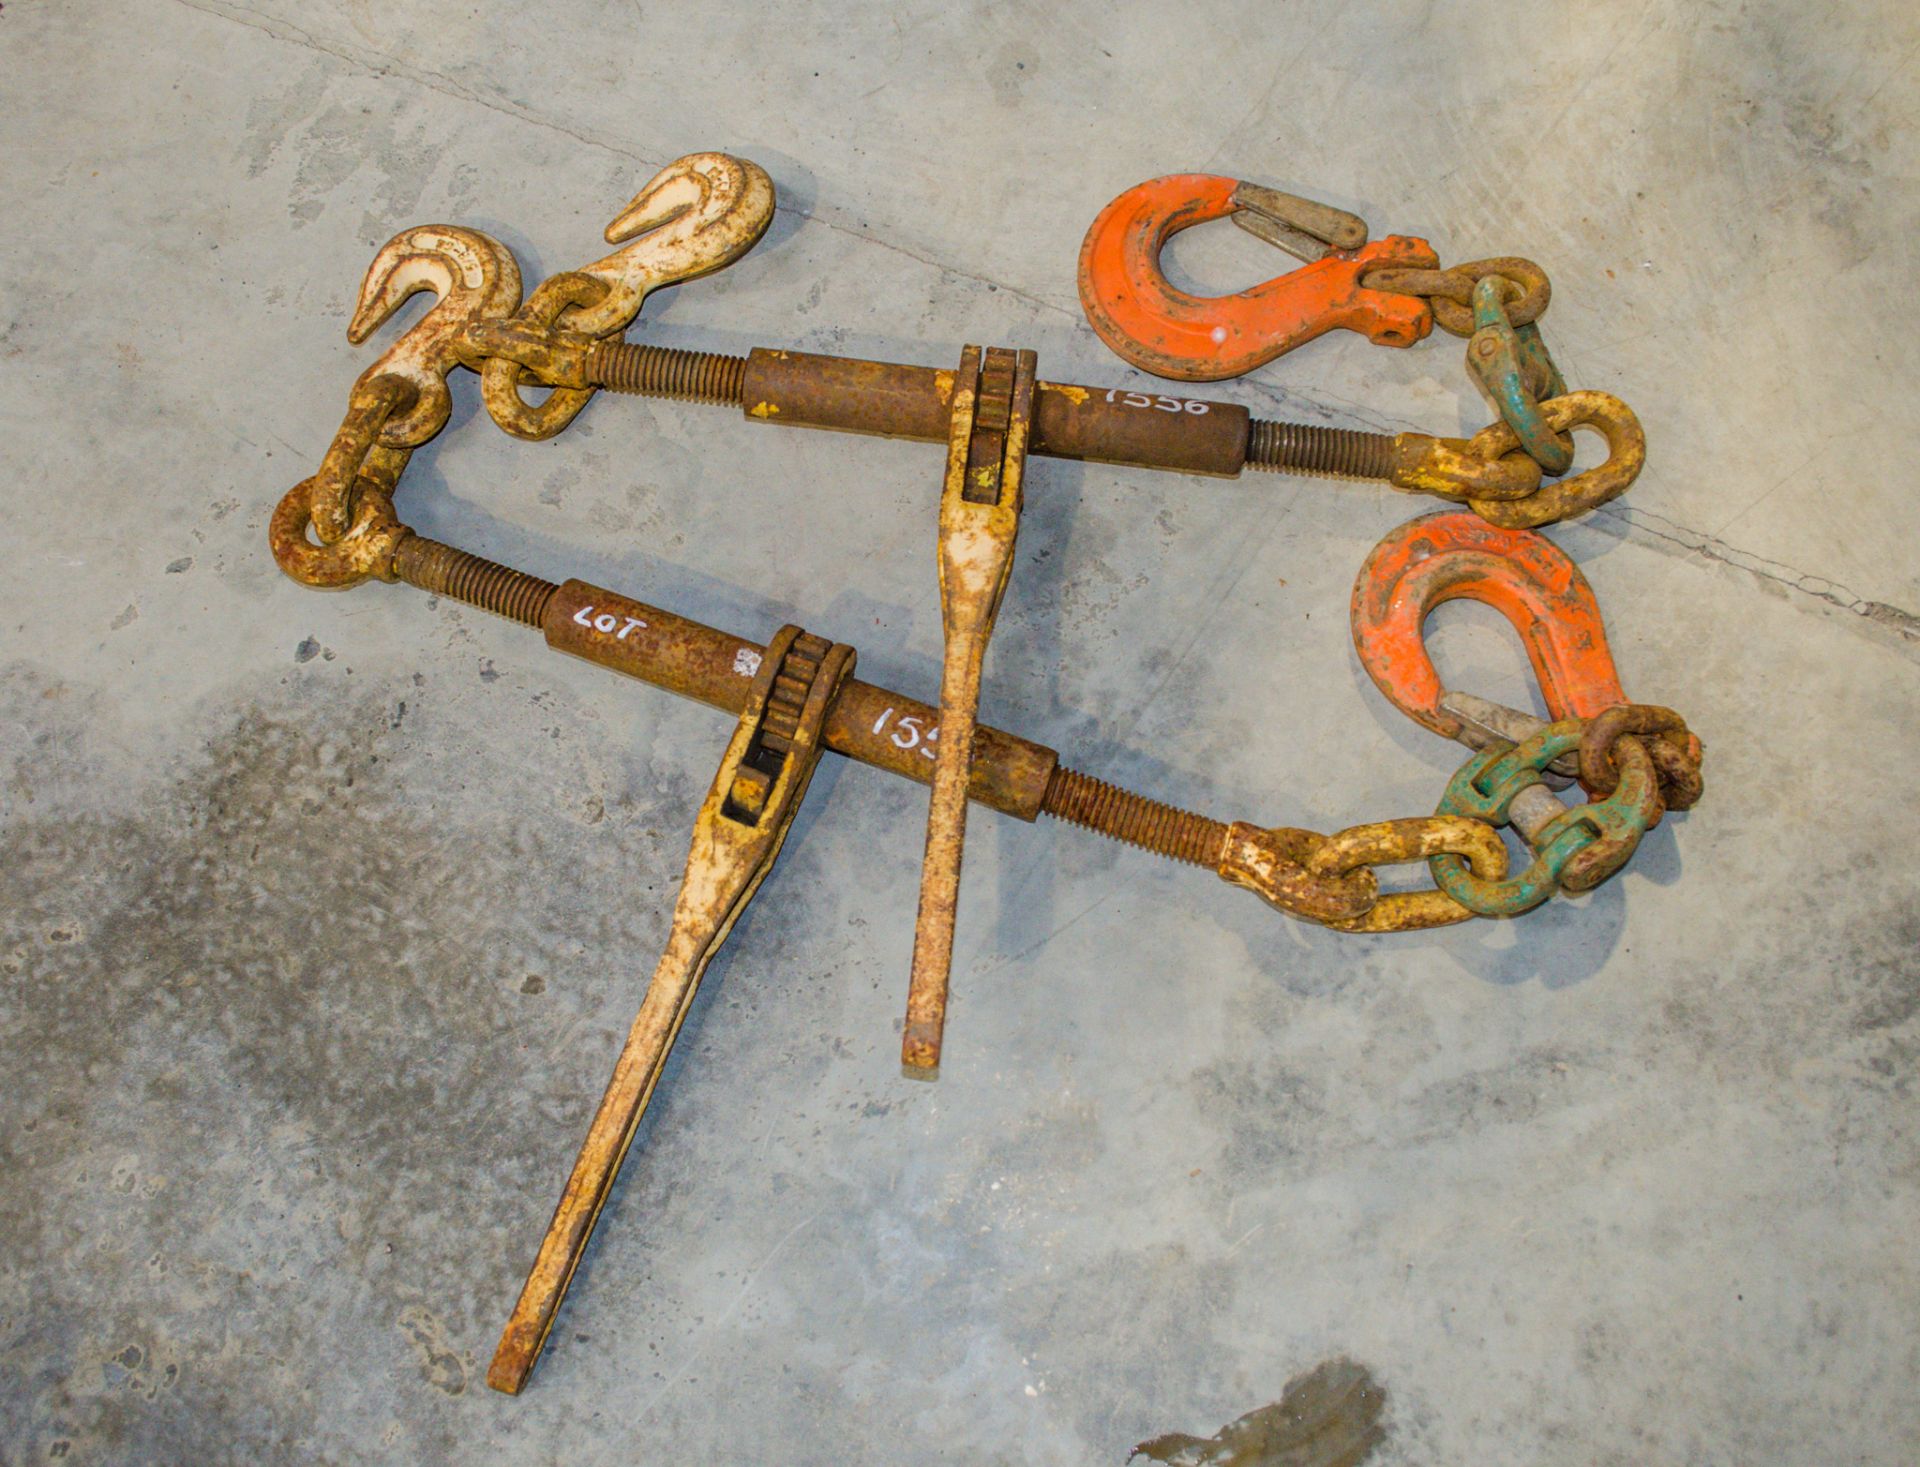 2 - chain tensioners